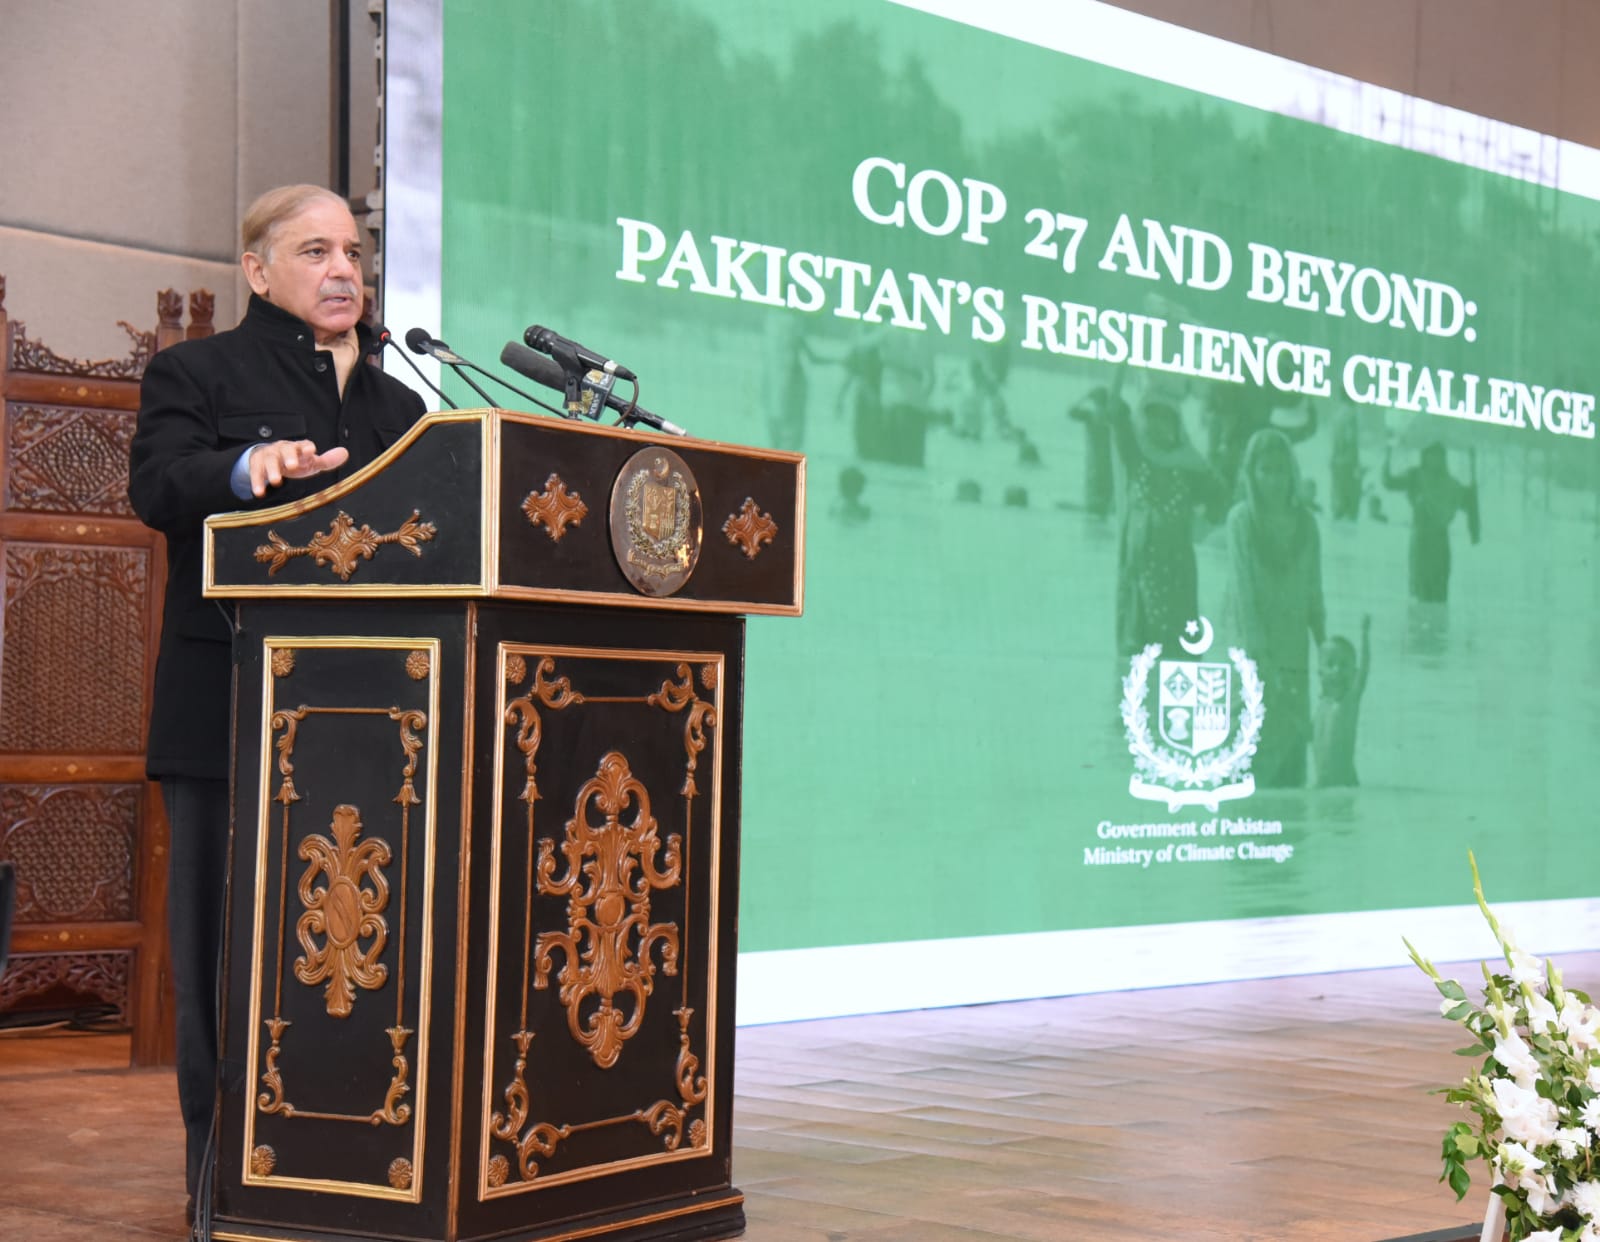 Prime Minister Muhammad Shehbaz Sharif addressing at COP 27 Reception, titled ‘COP 27 and Beyond: Pakistan’s Resilience Challenge